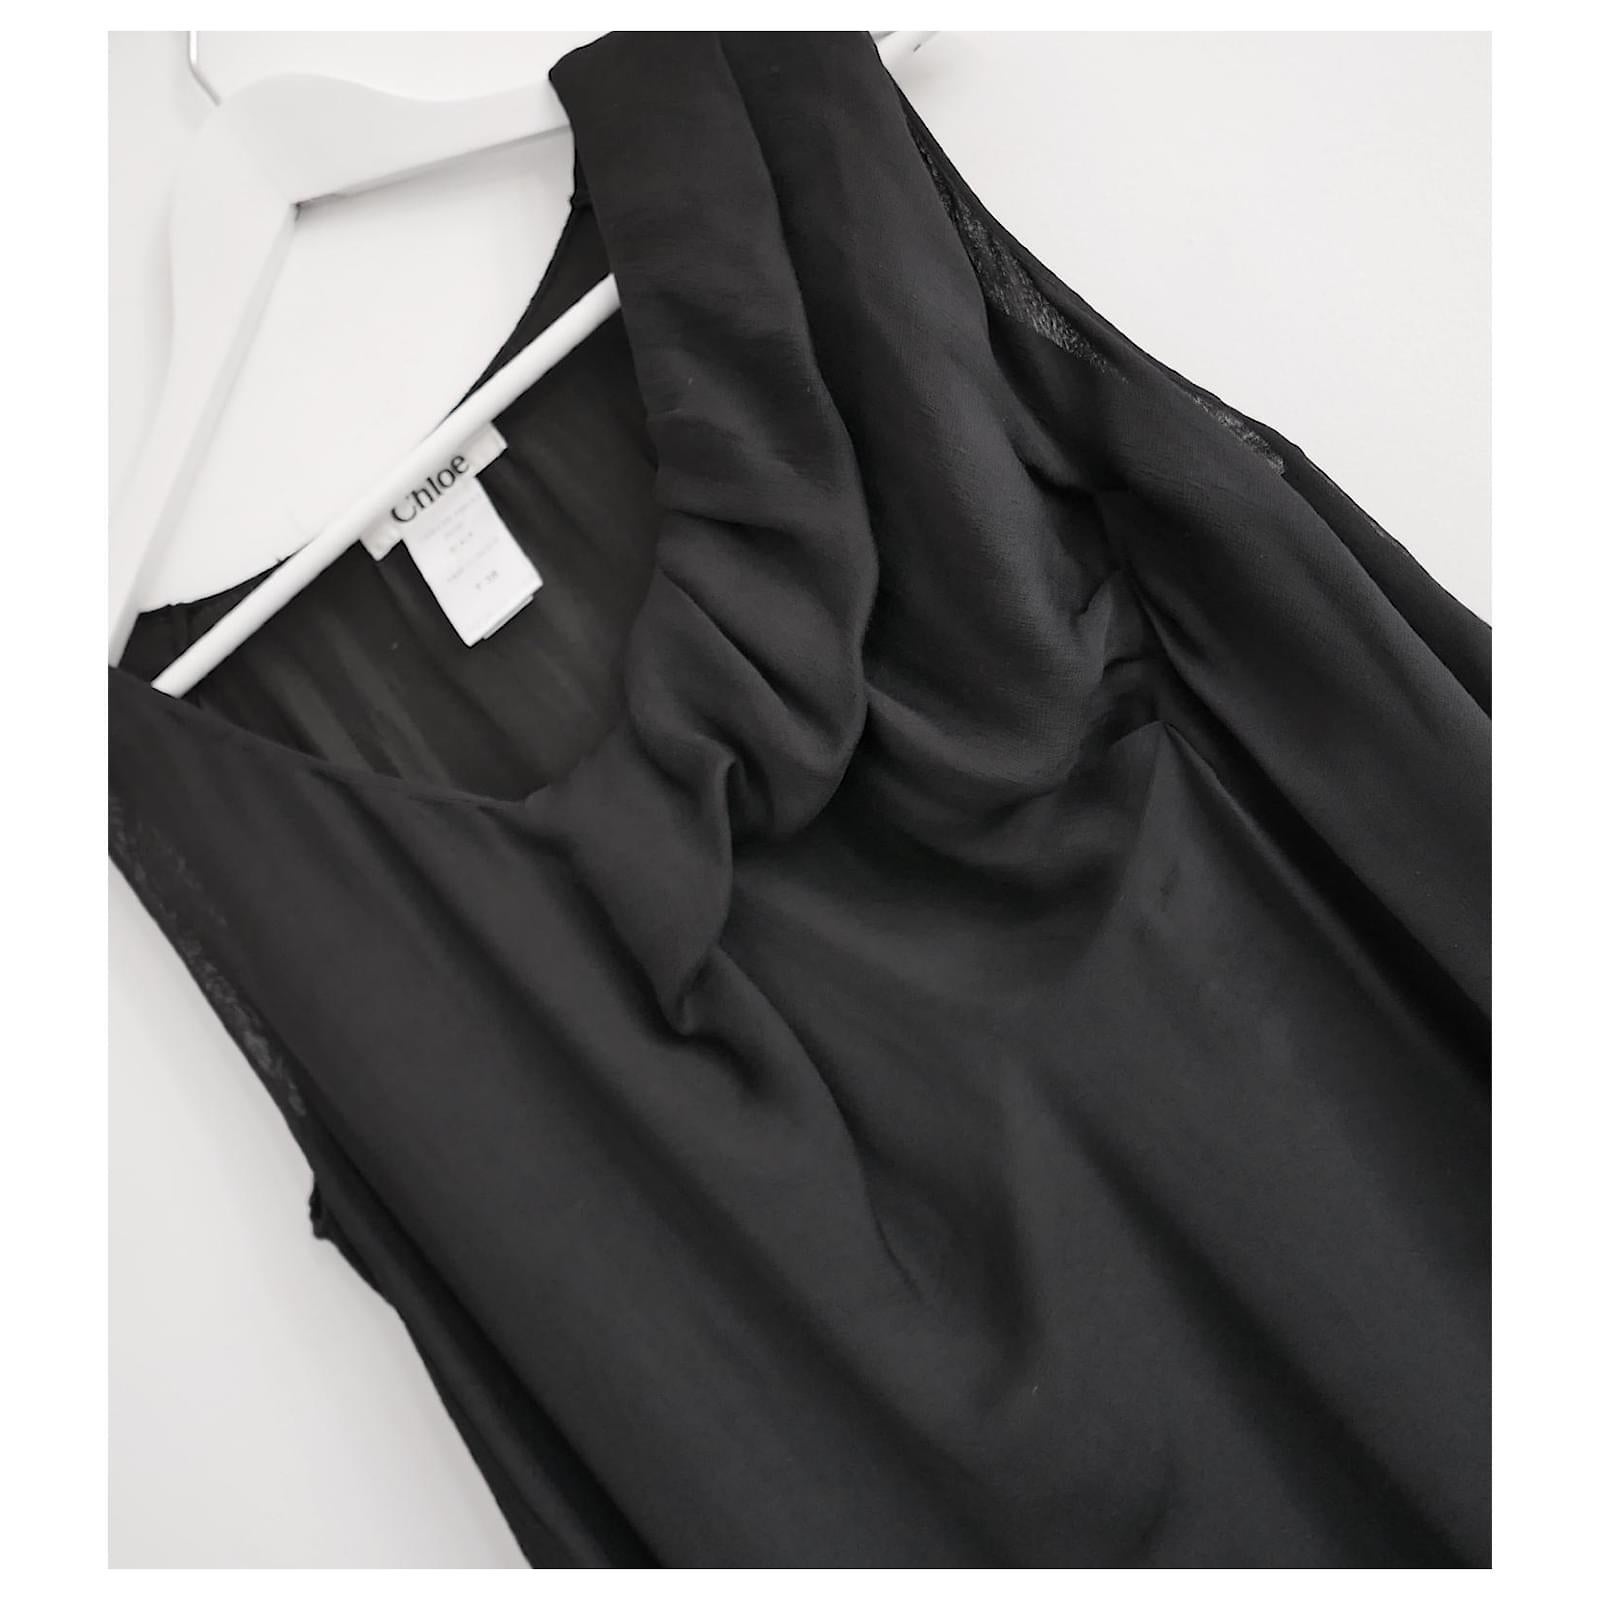 Gorgeous archival Chloe black dress from the Fall 2007 Collection. Made from 3 layers of soft black silk chiffon with soft ribbed jersey panel to the back. It has soft draping to the front and a relaxed, Loose fit. Size FR38/UK10 and will fit